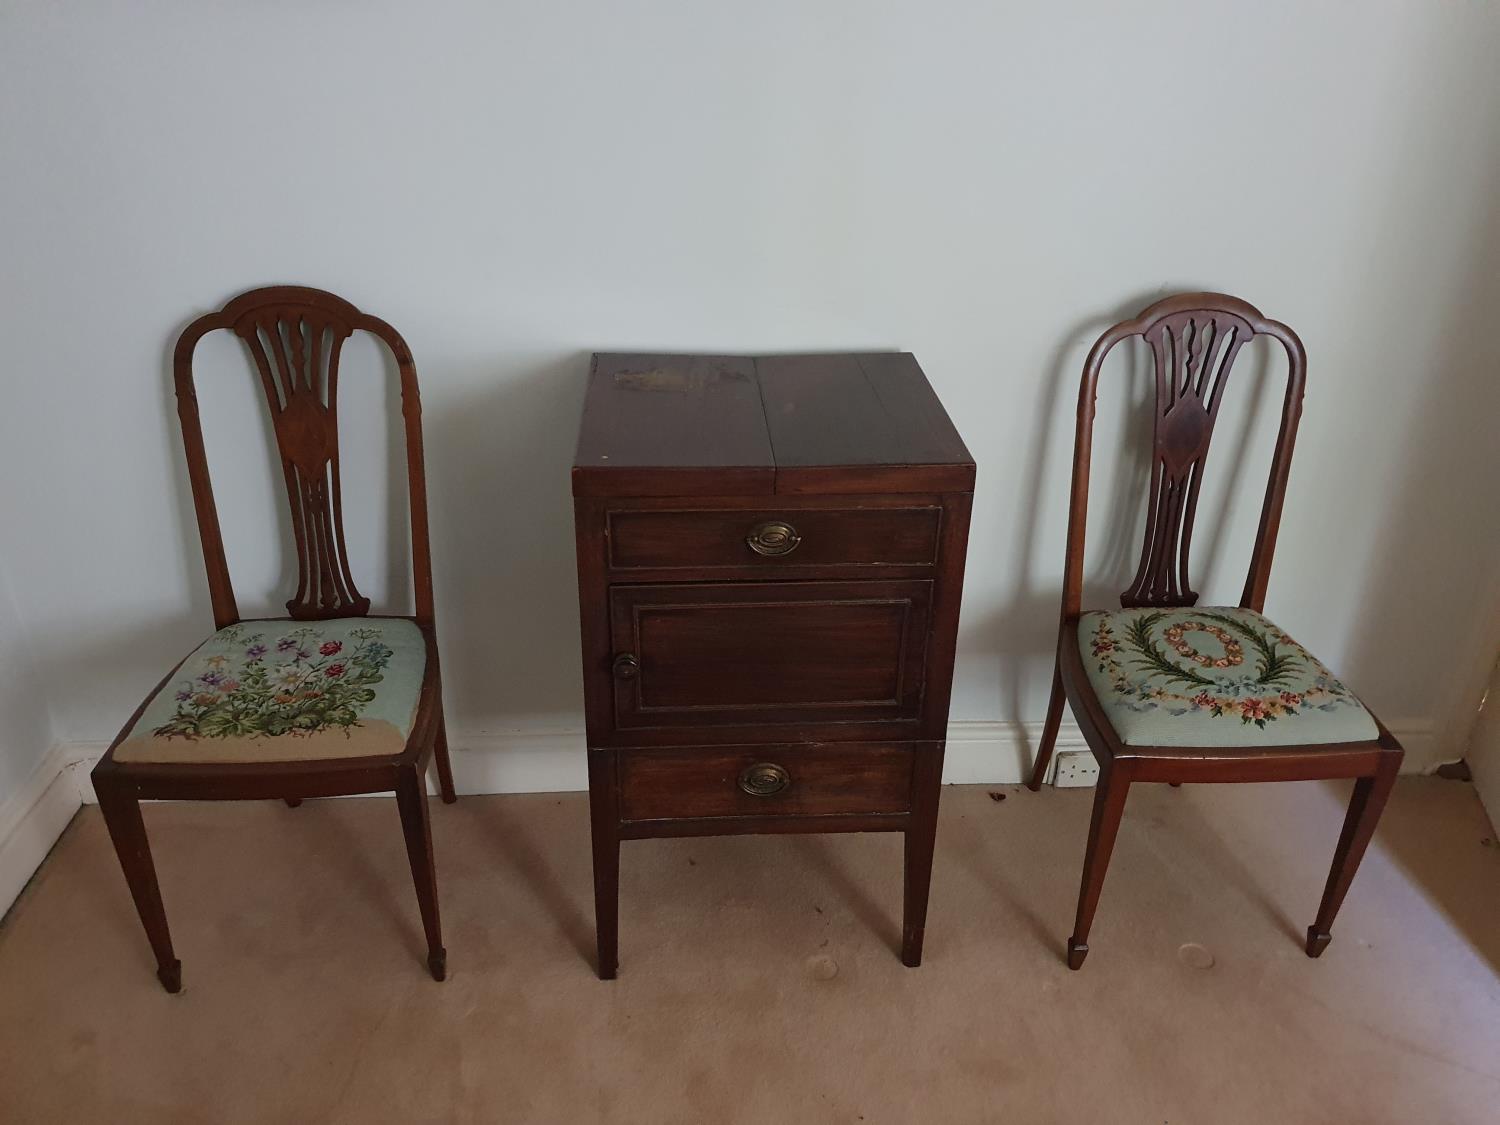 A lovely pair of Edwardian Mahogany Inlaid chairs with tapestry seats. L96 x D42 x W43cm approx.